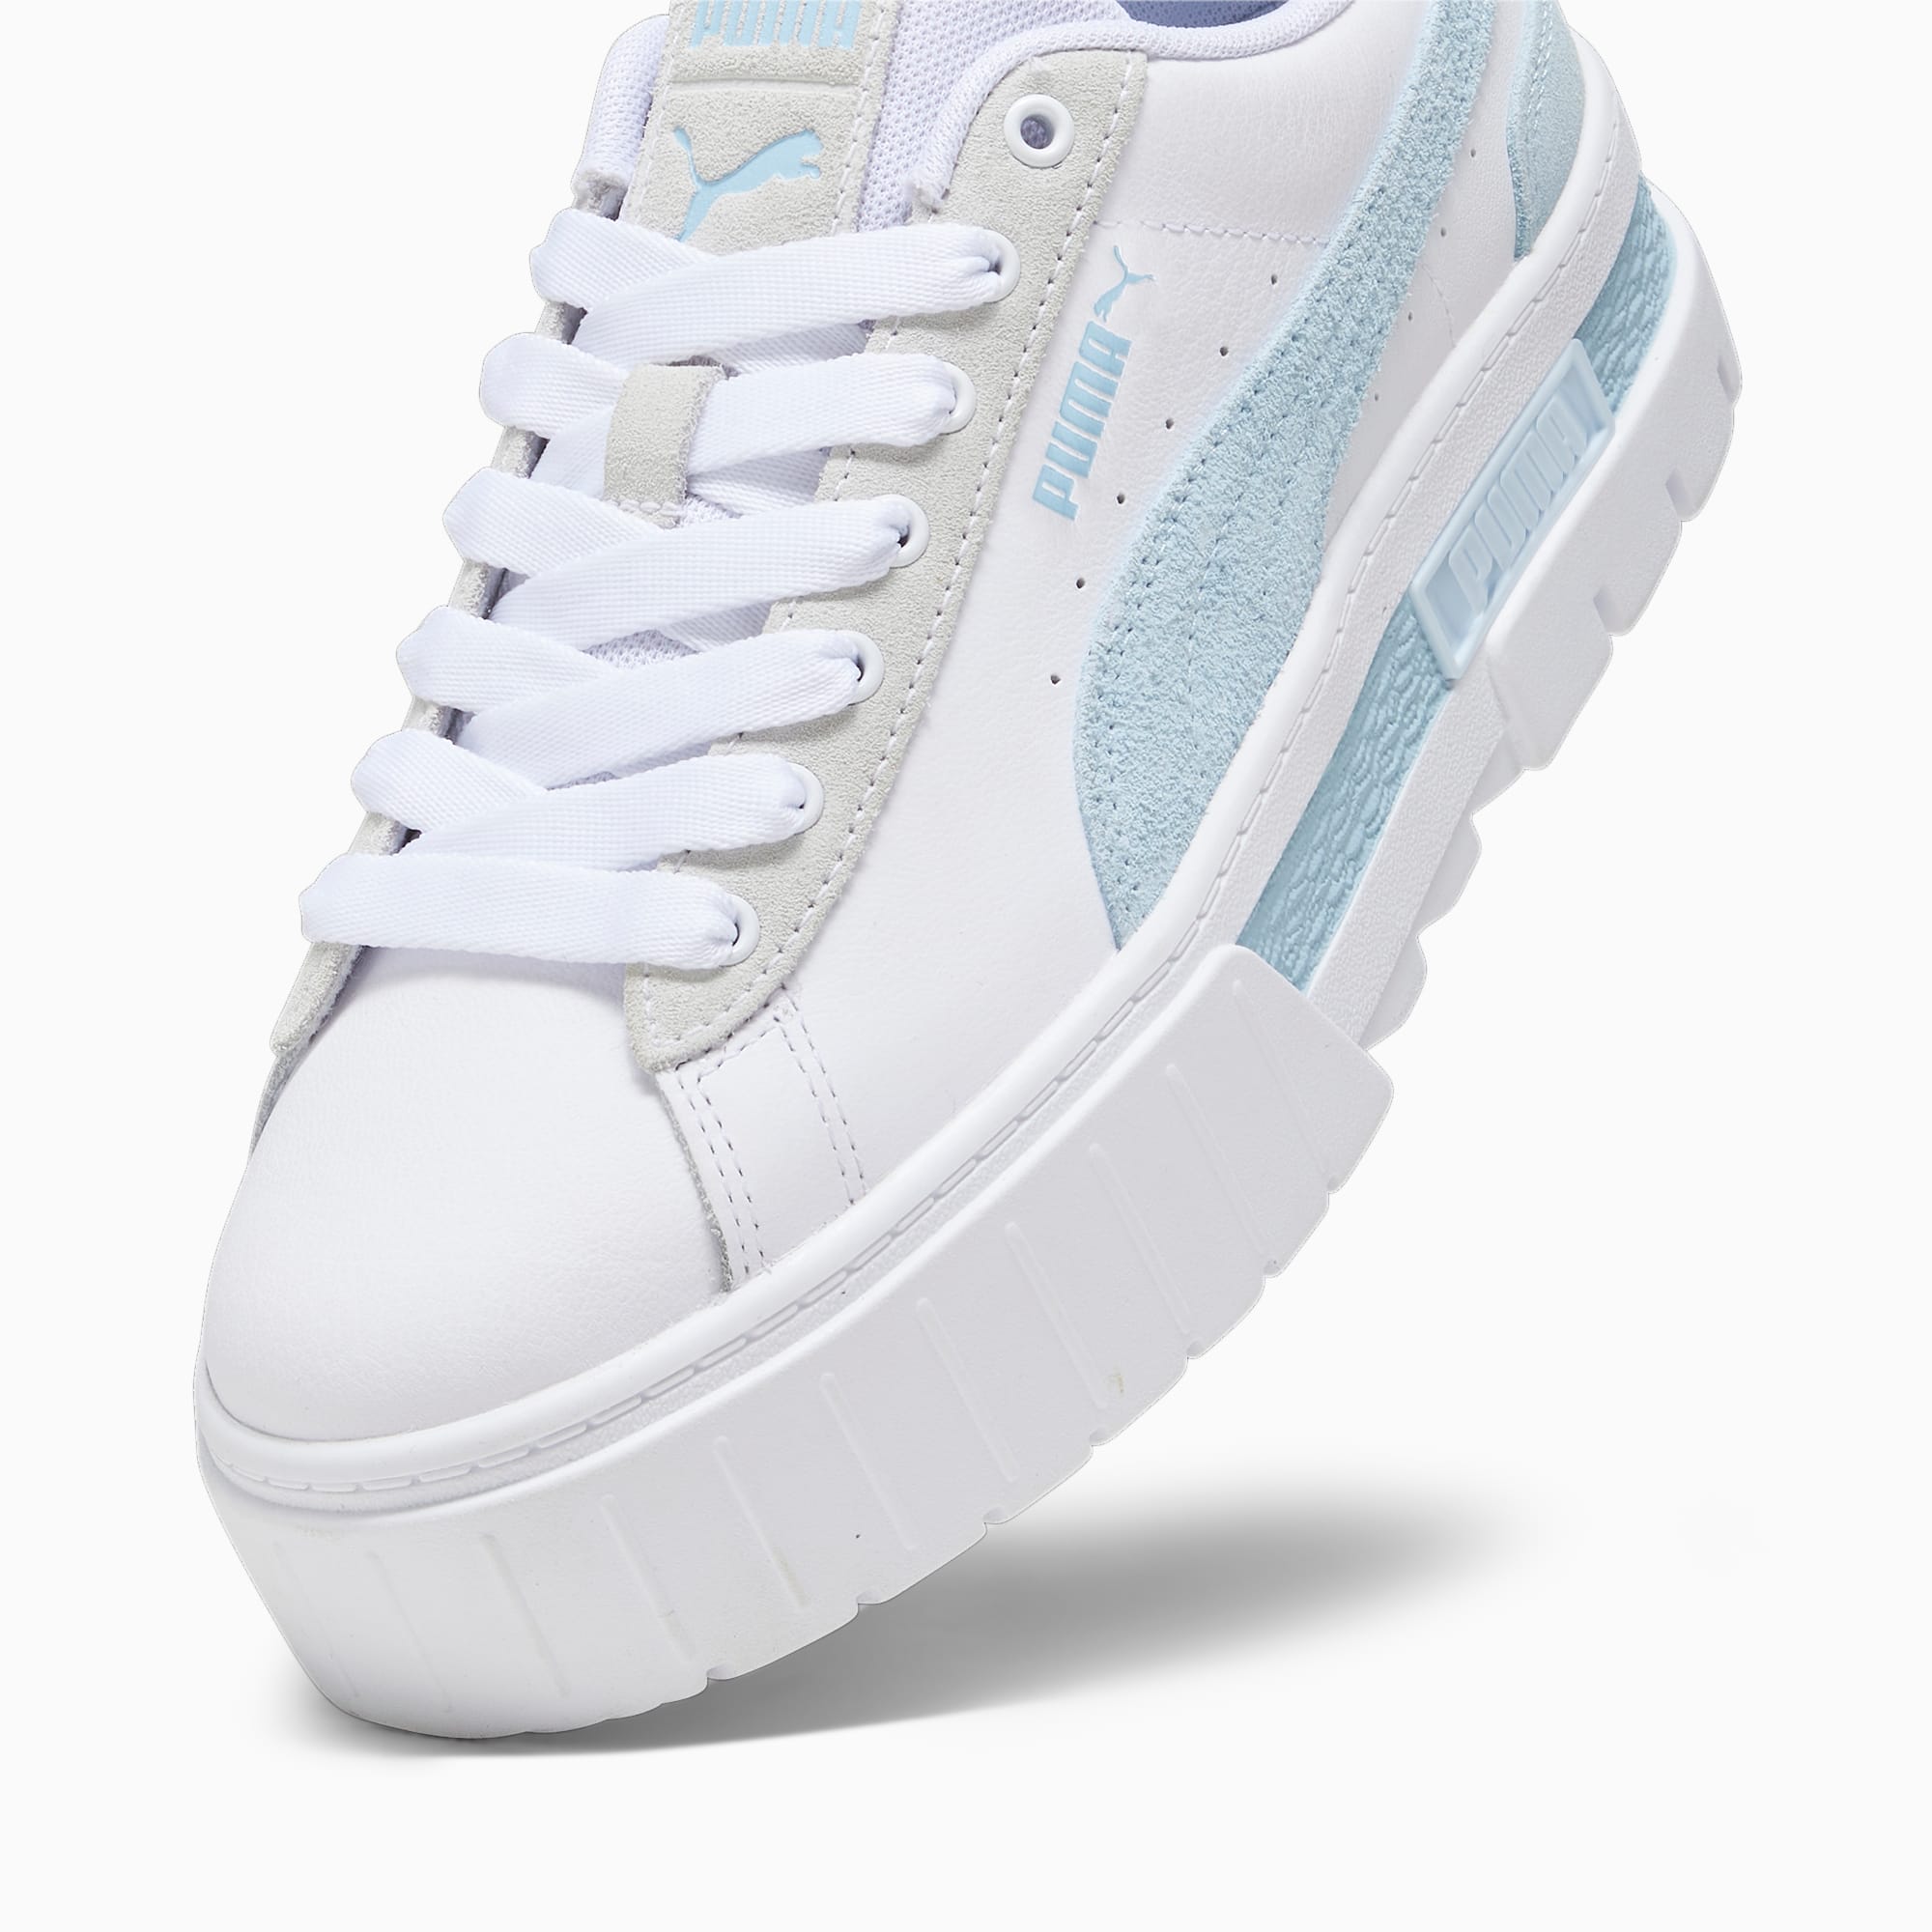 PUMA Mayze Mix Women's Sneakers, White/Icy Blue, Size 35,5, Shoes